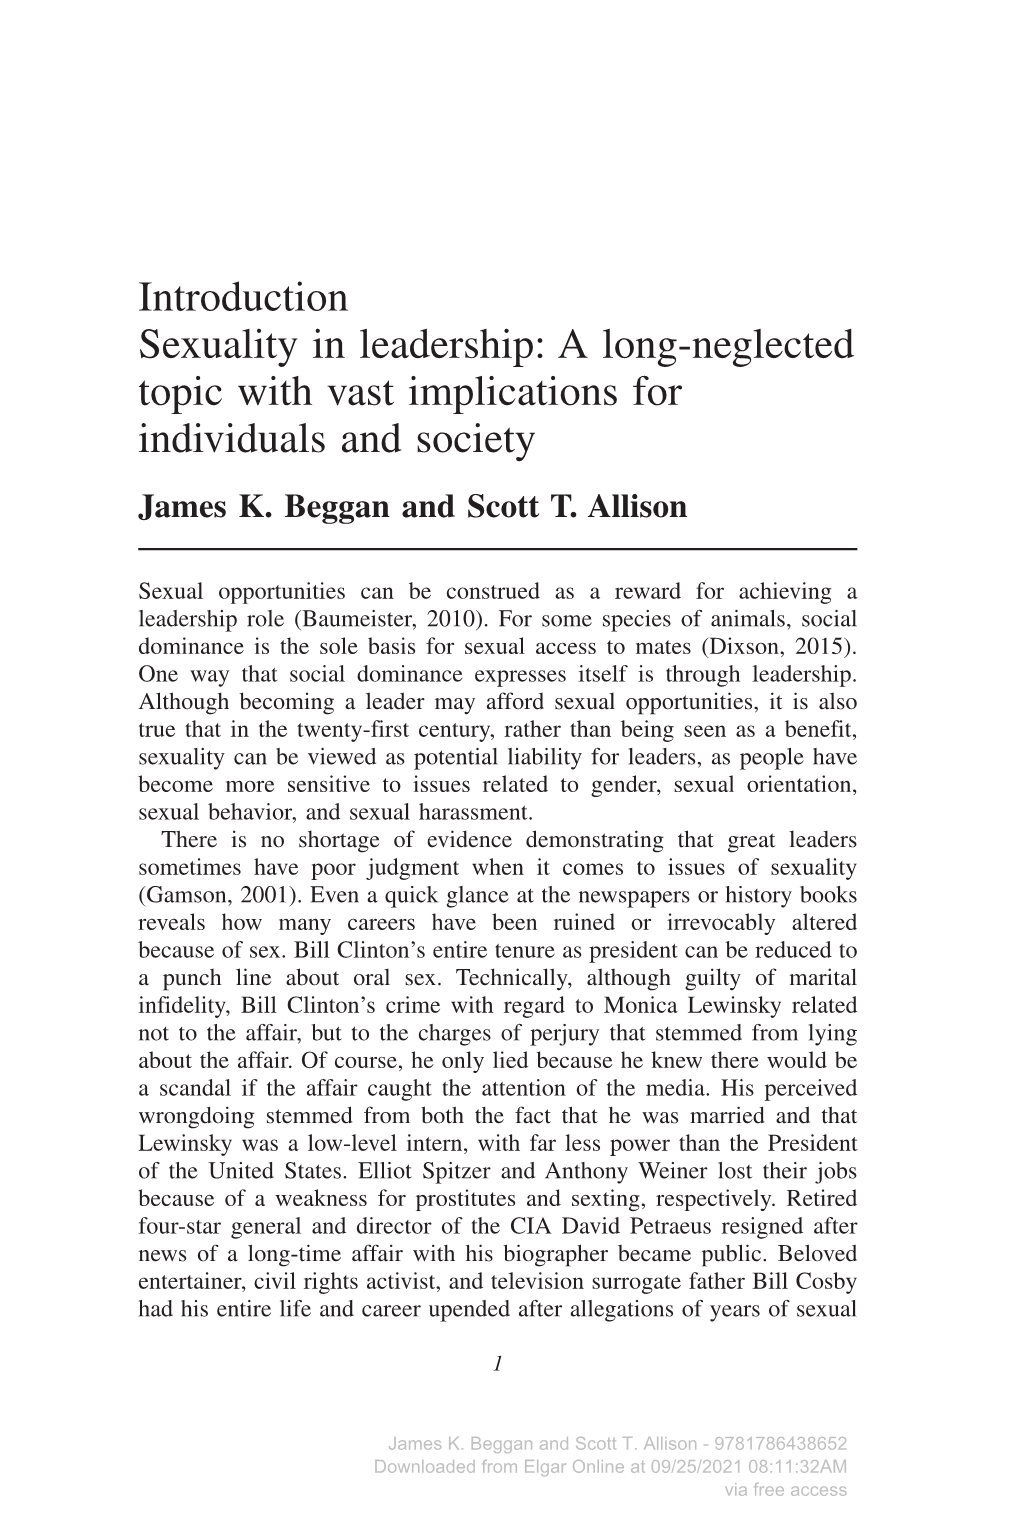 Introduction Sexuality in Leadership: a Long-Neglected Topic with Vast Implications for Individuals and Society James K